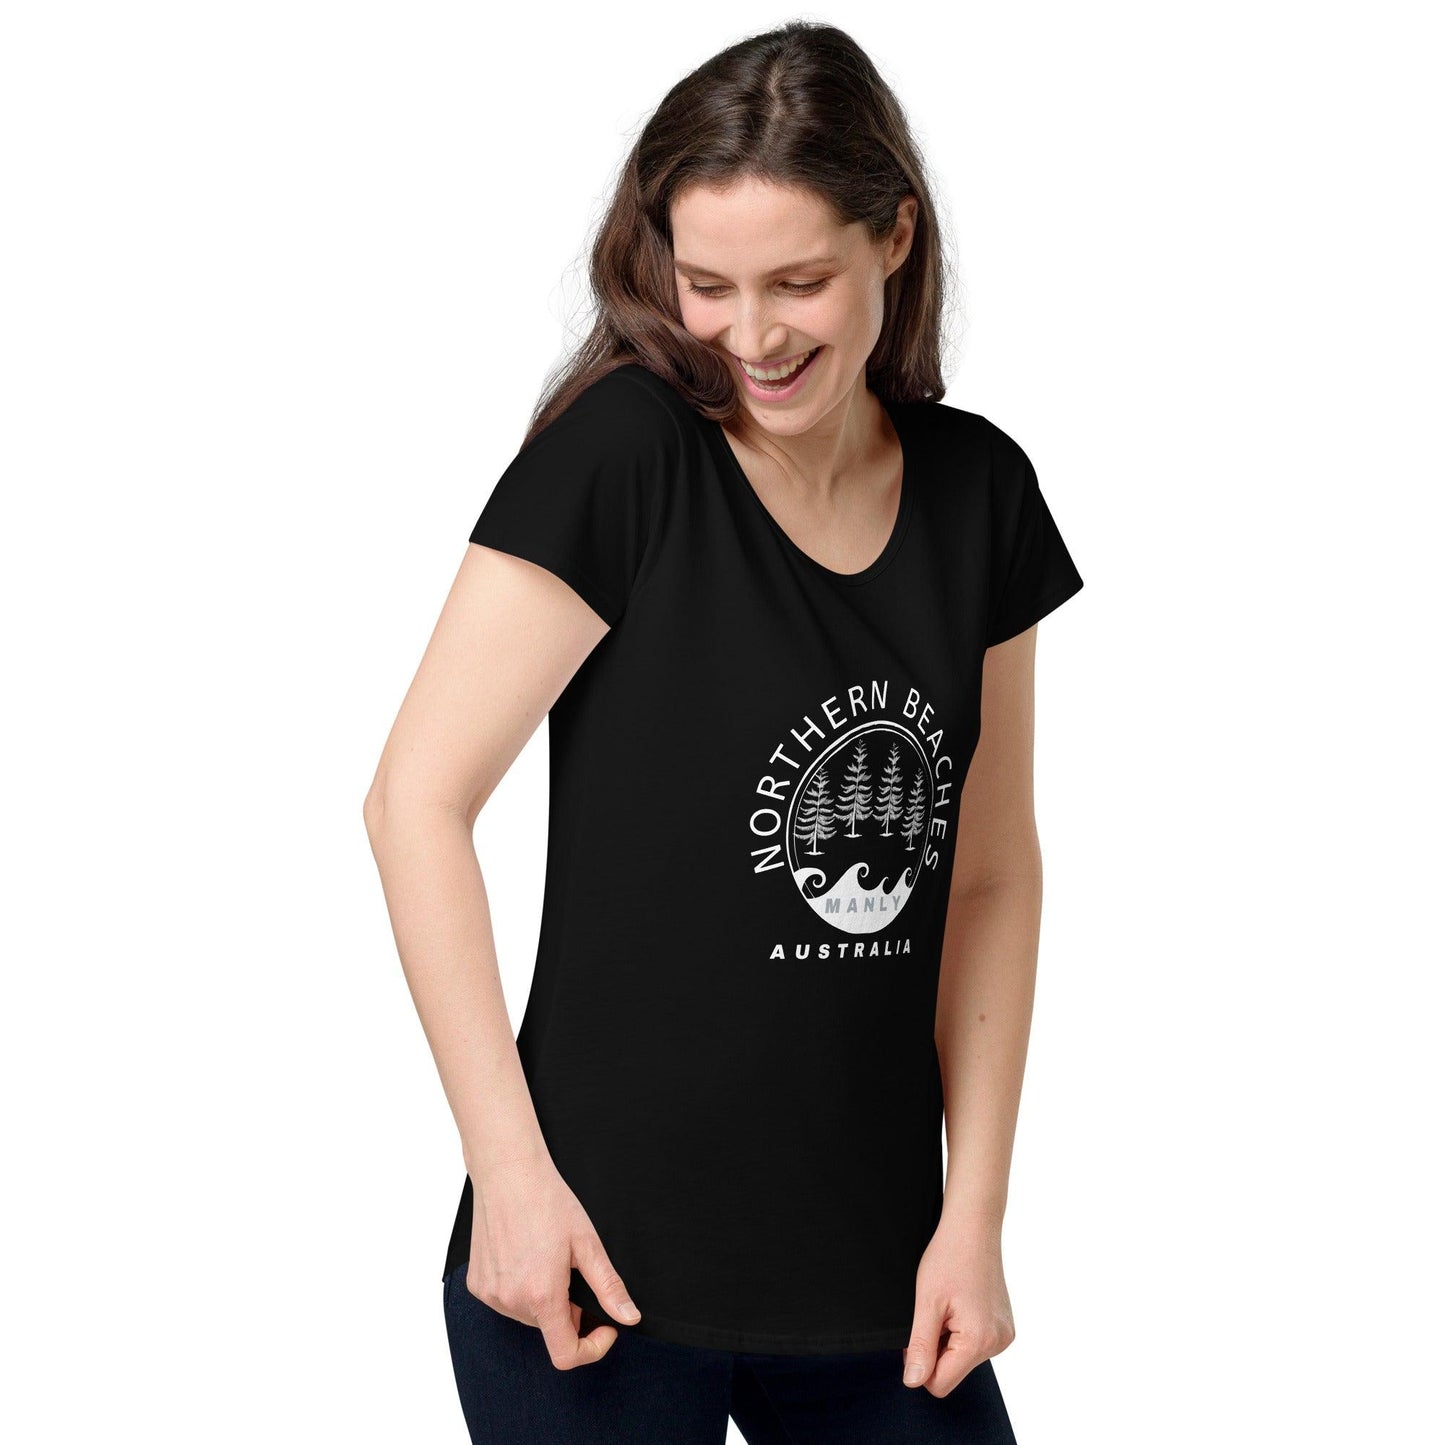 Women’s round neck tee with logo in 2 places - Lost Manly Shop